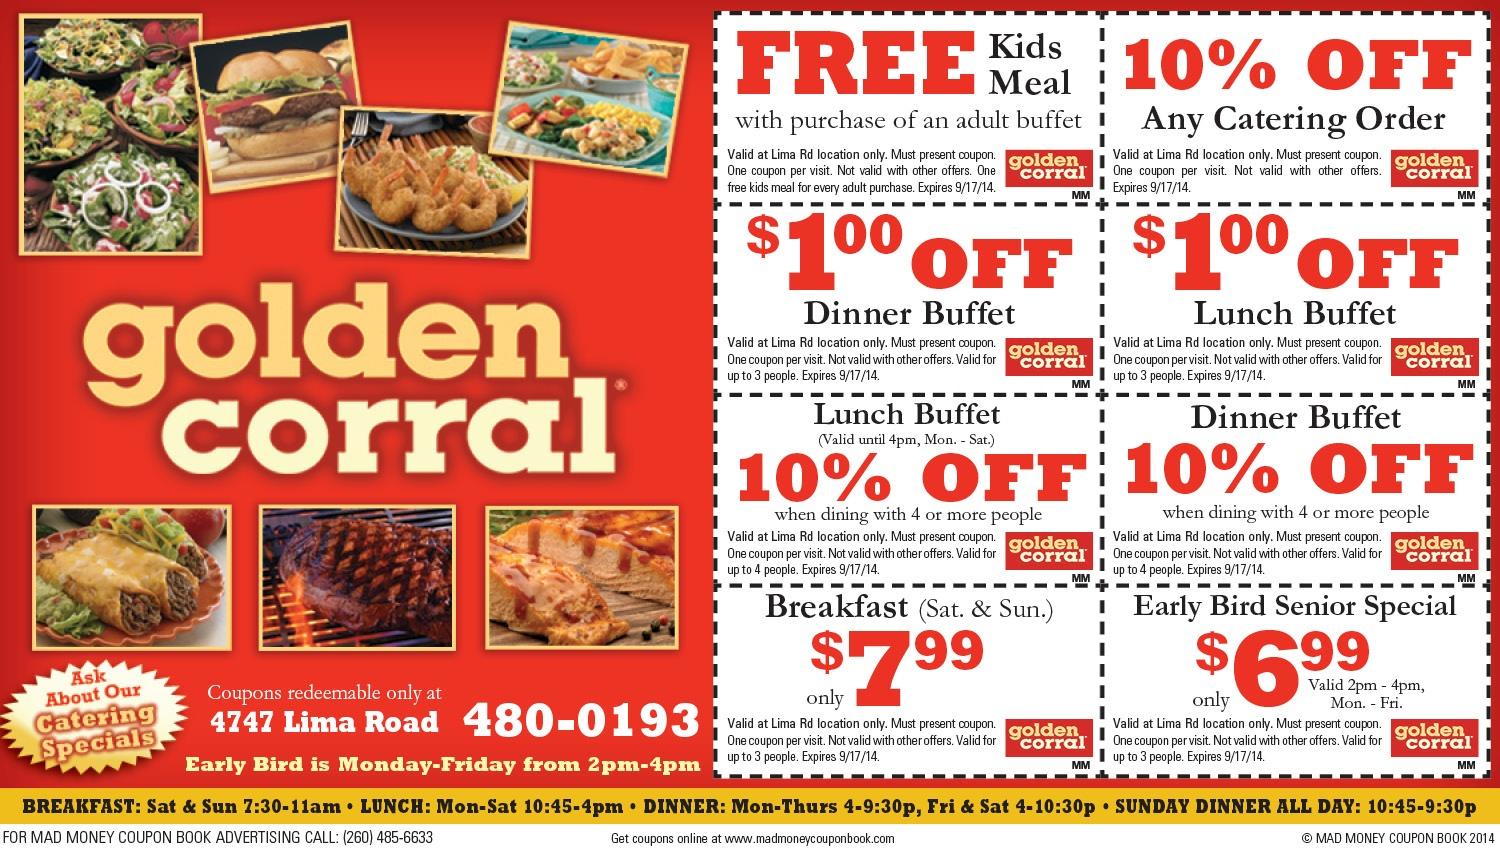 Golden Corral Coupons Buy One Get One Free Printable Free Printable